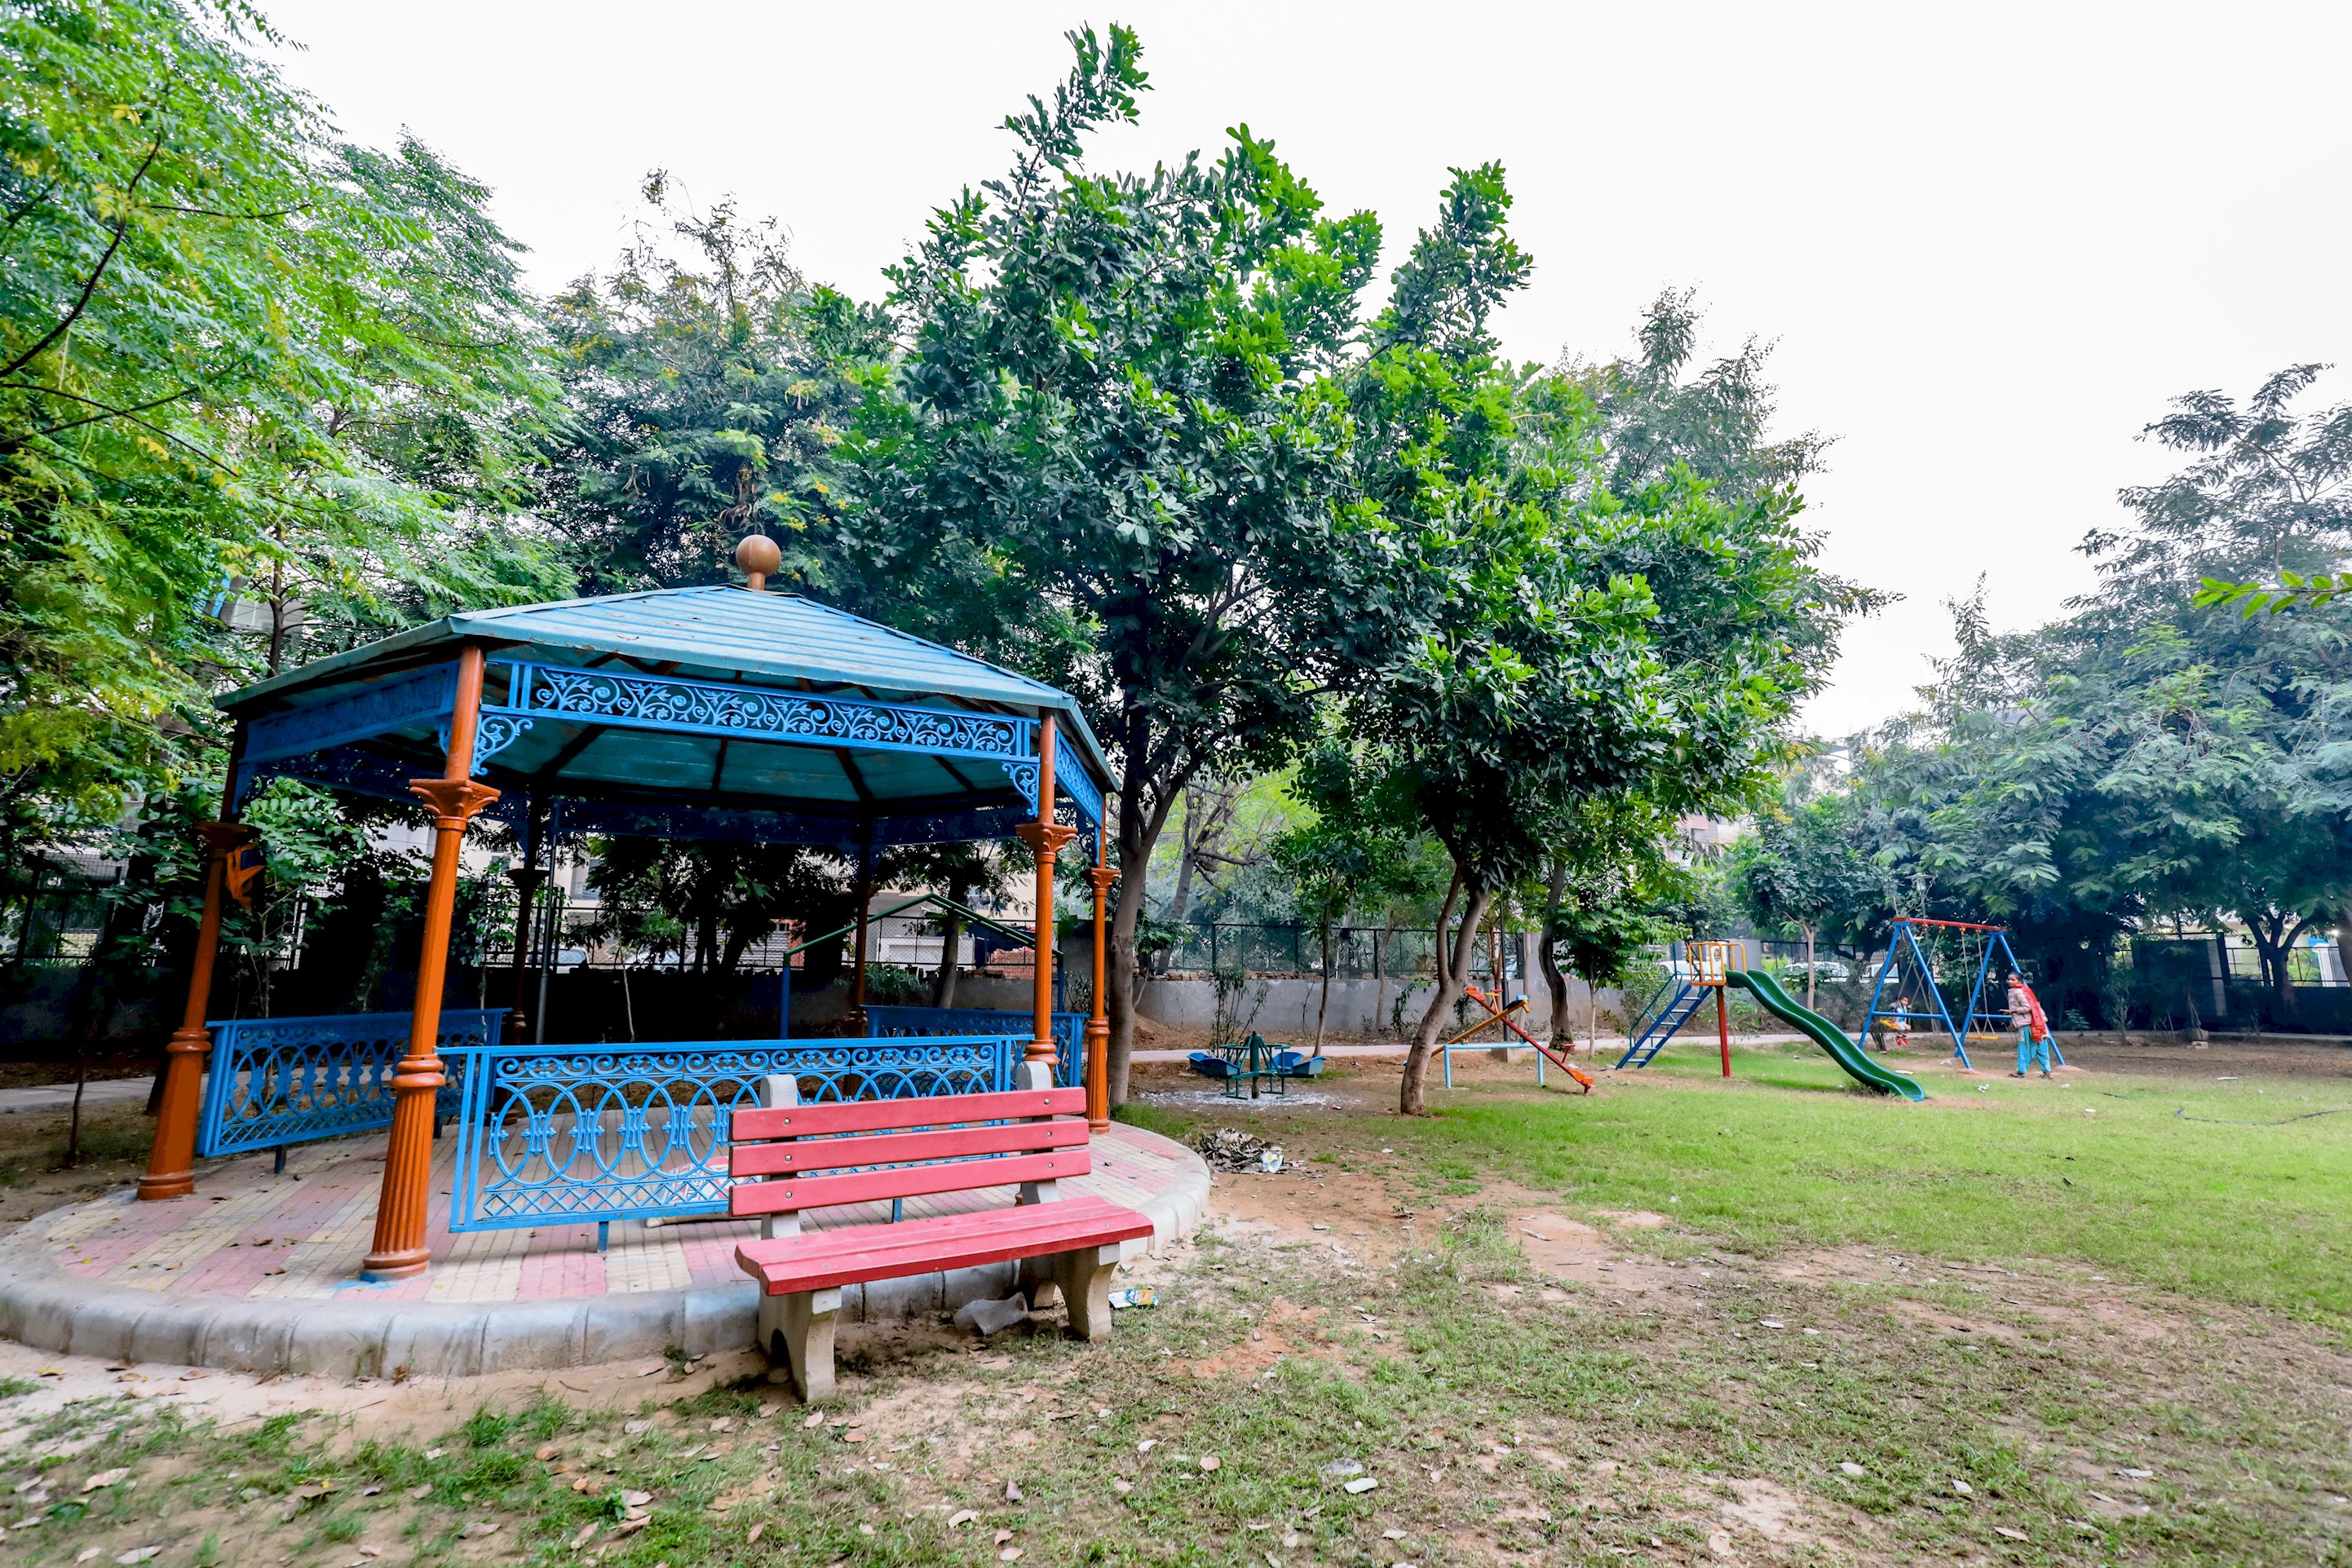 A vibrant park scene featuring children enjoying rides and games, with colorful play equipment and joyful laughter filling the air
